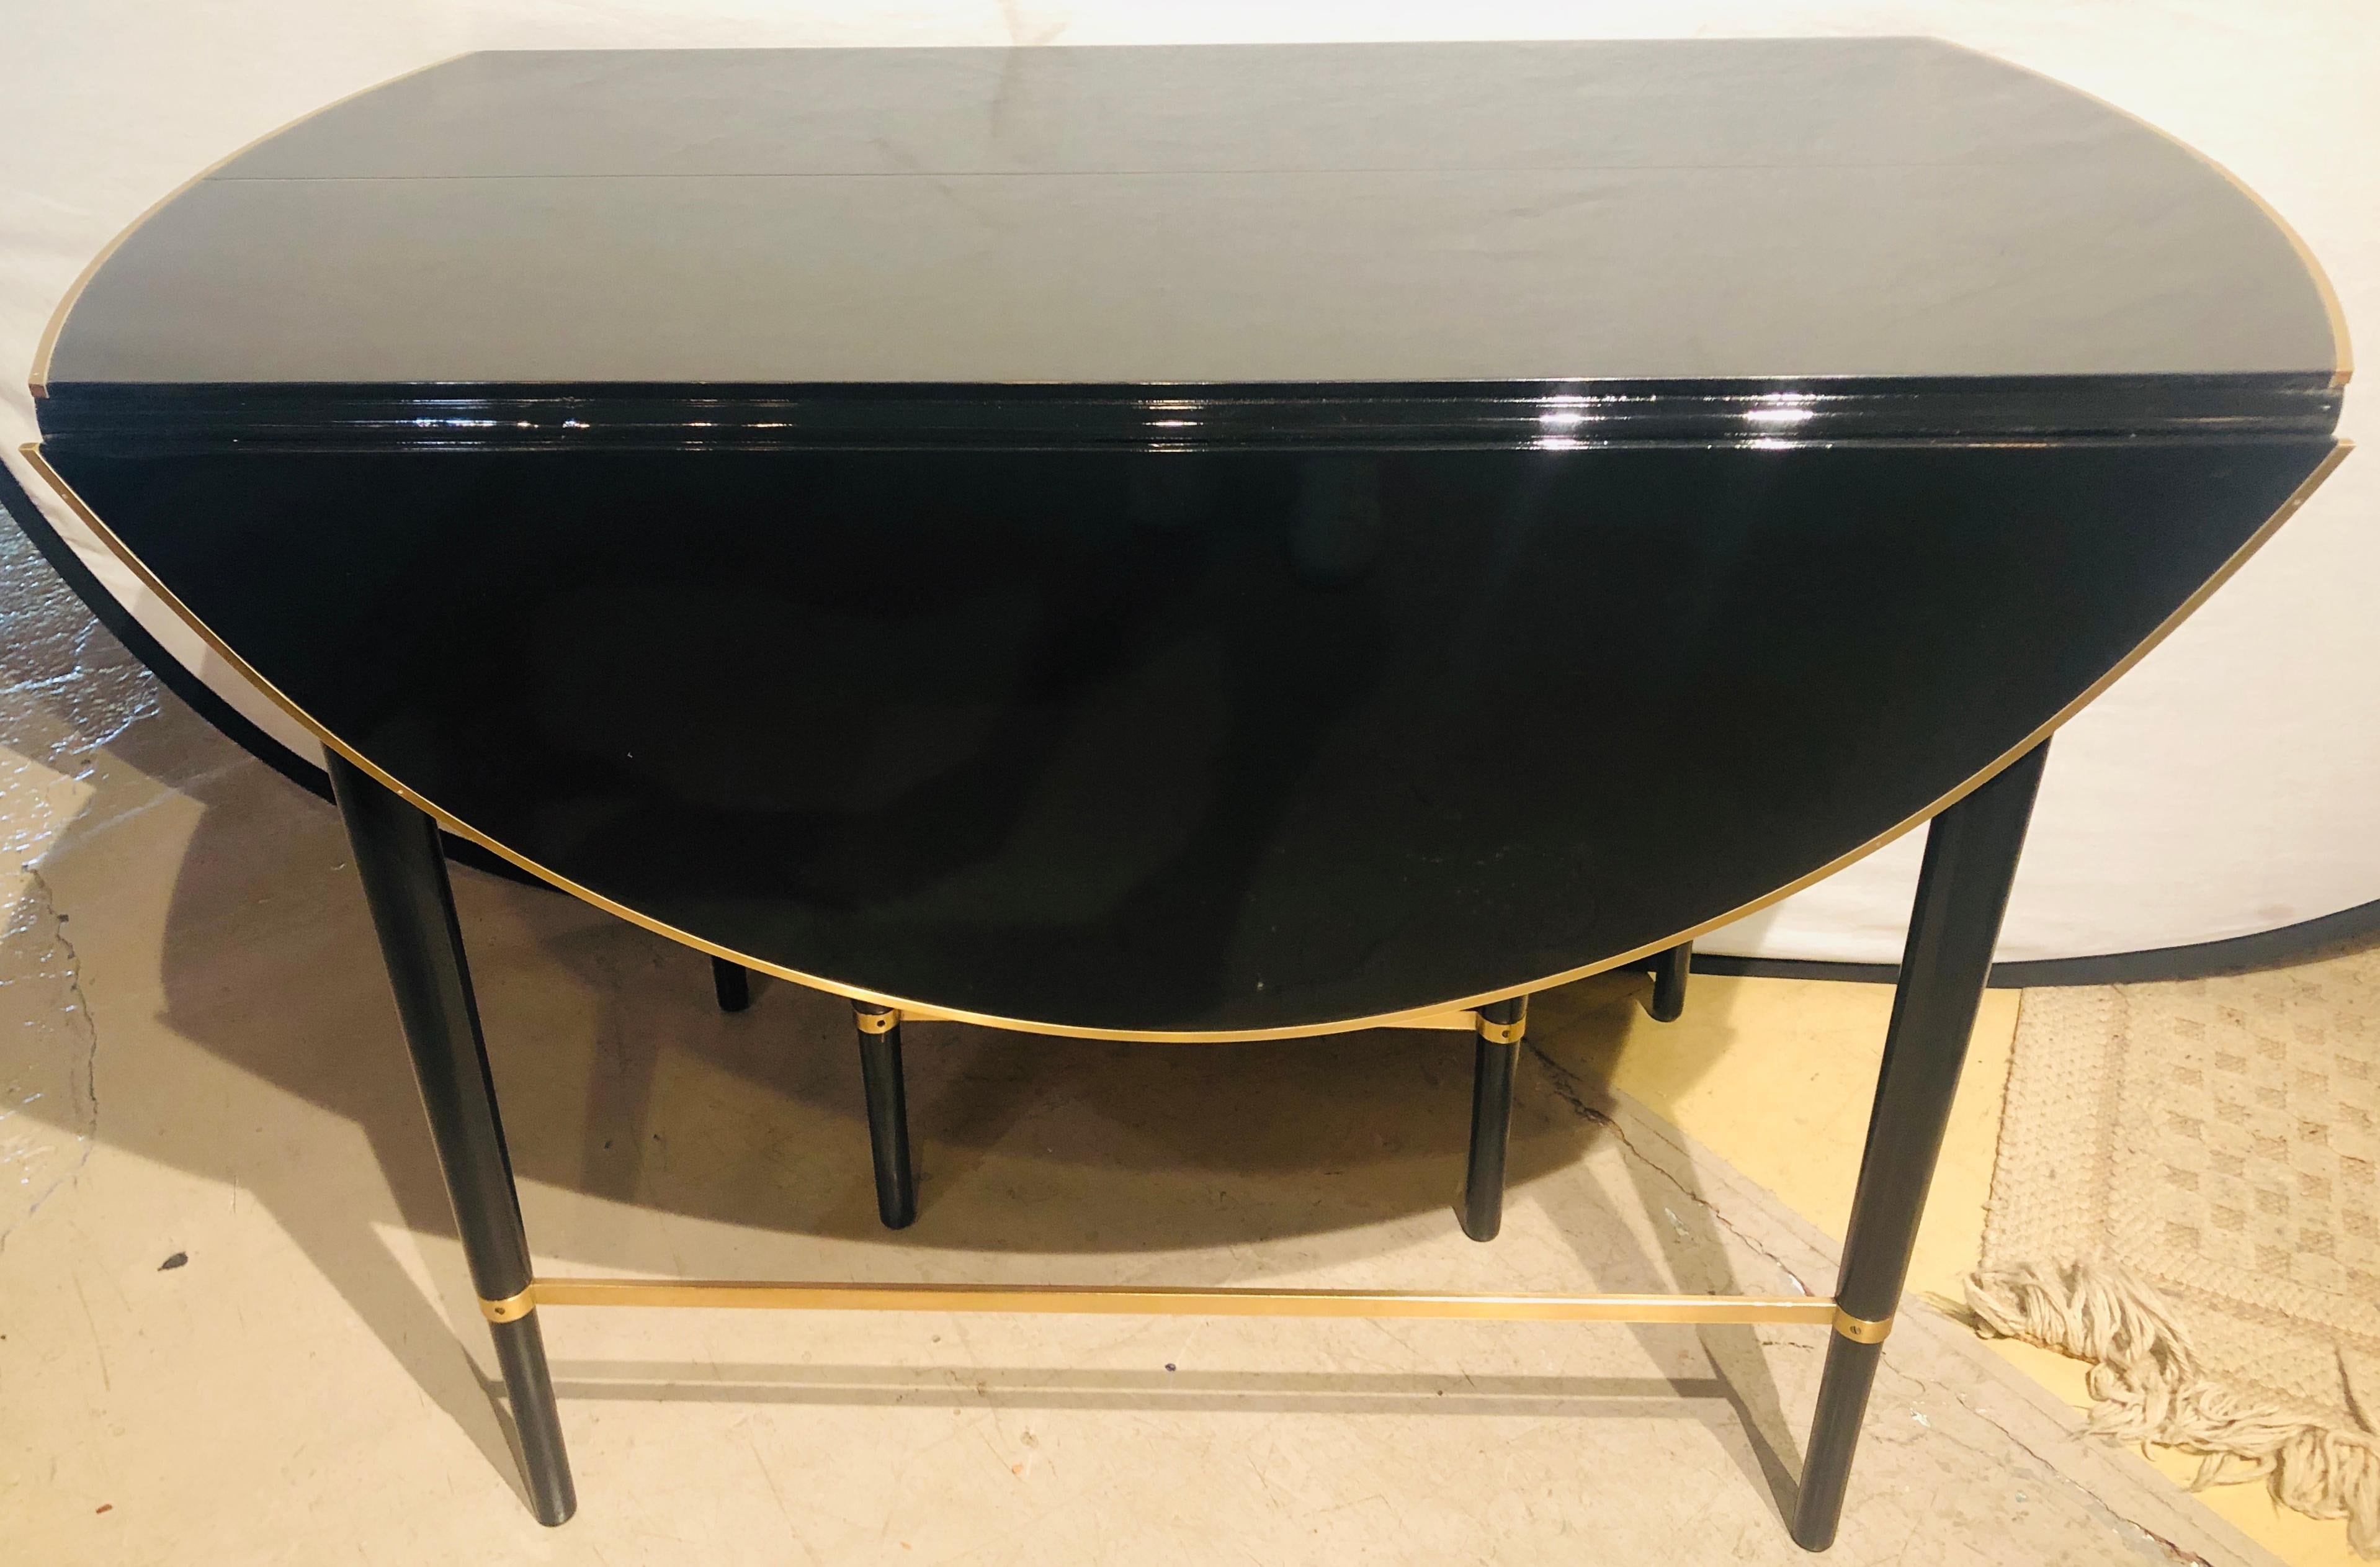 American Mid-Century Modern Black Lacquered Paul McCobb Serving / Dining Table 5 Leaves